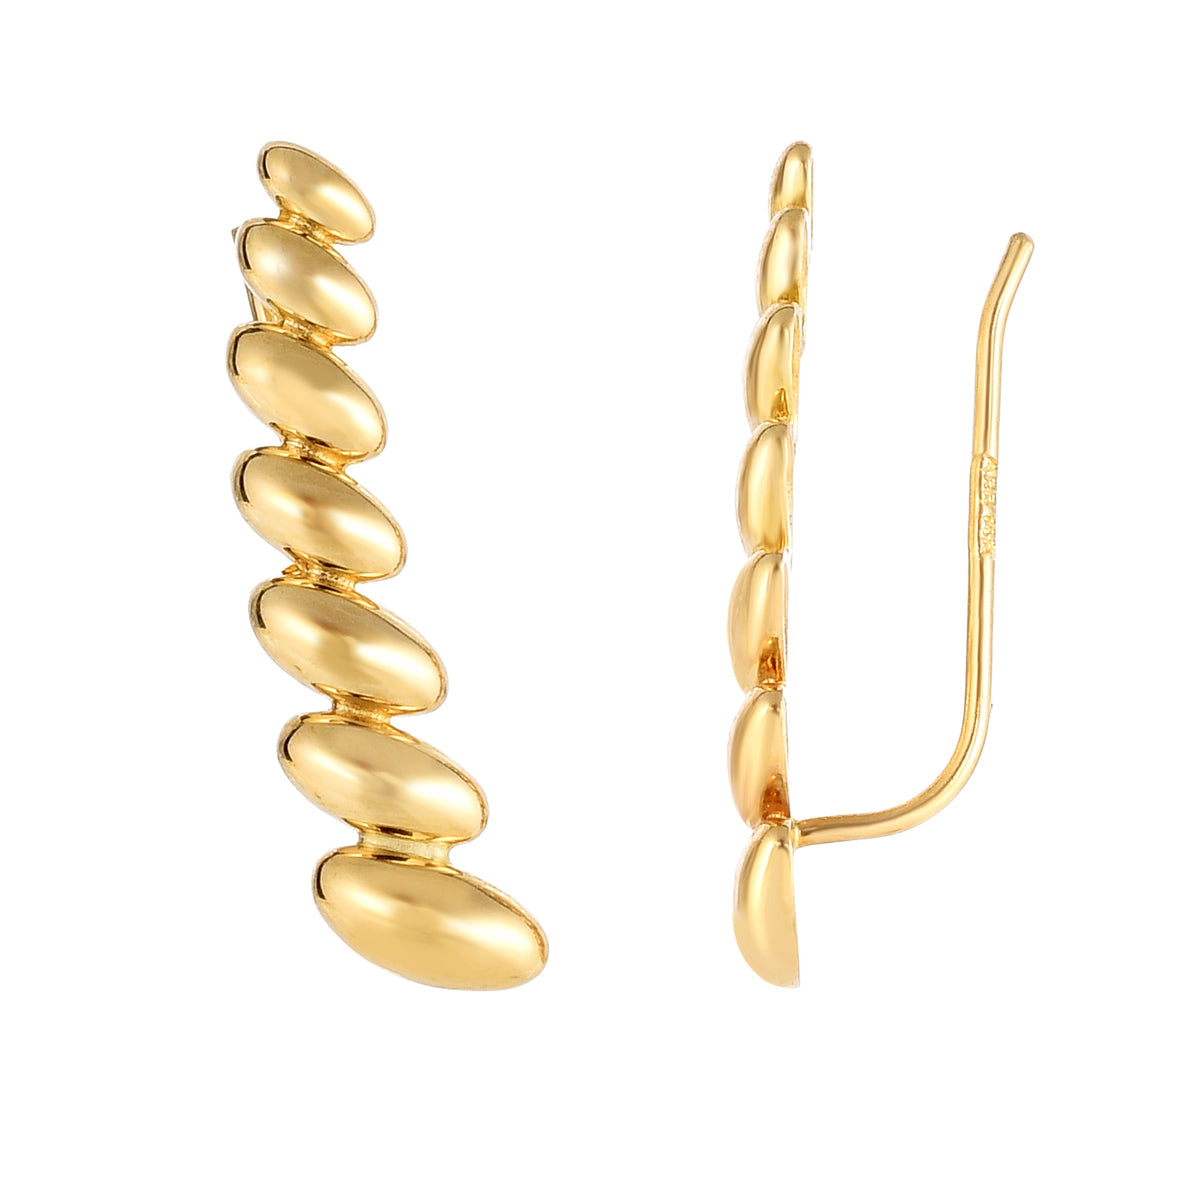 14K Yellow Gold Graduated Oval Series Climber Earrings fine designer jewelry for men and women